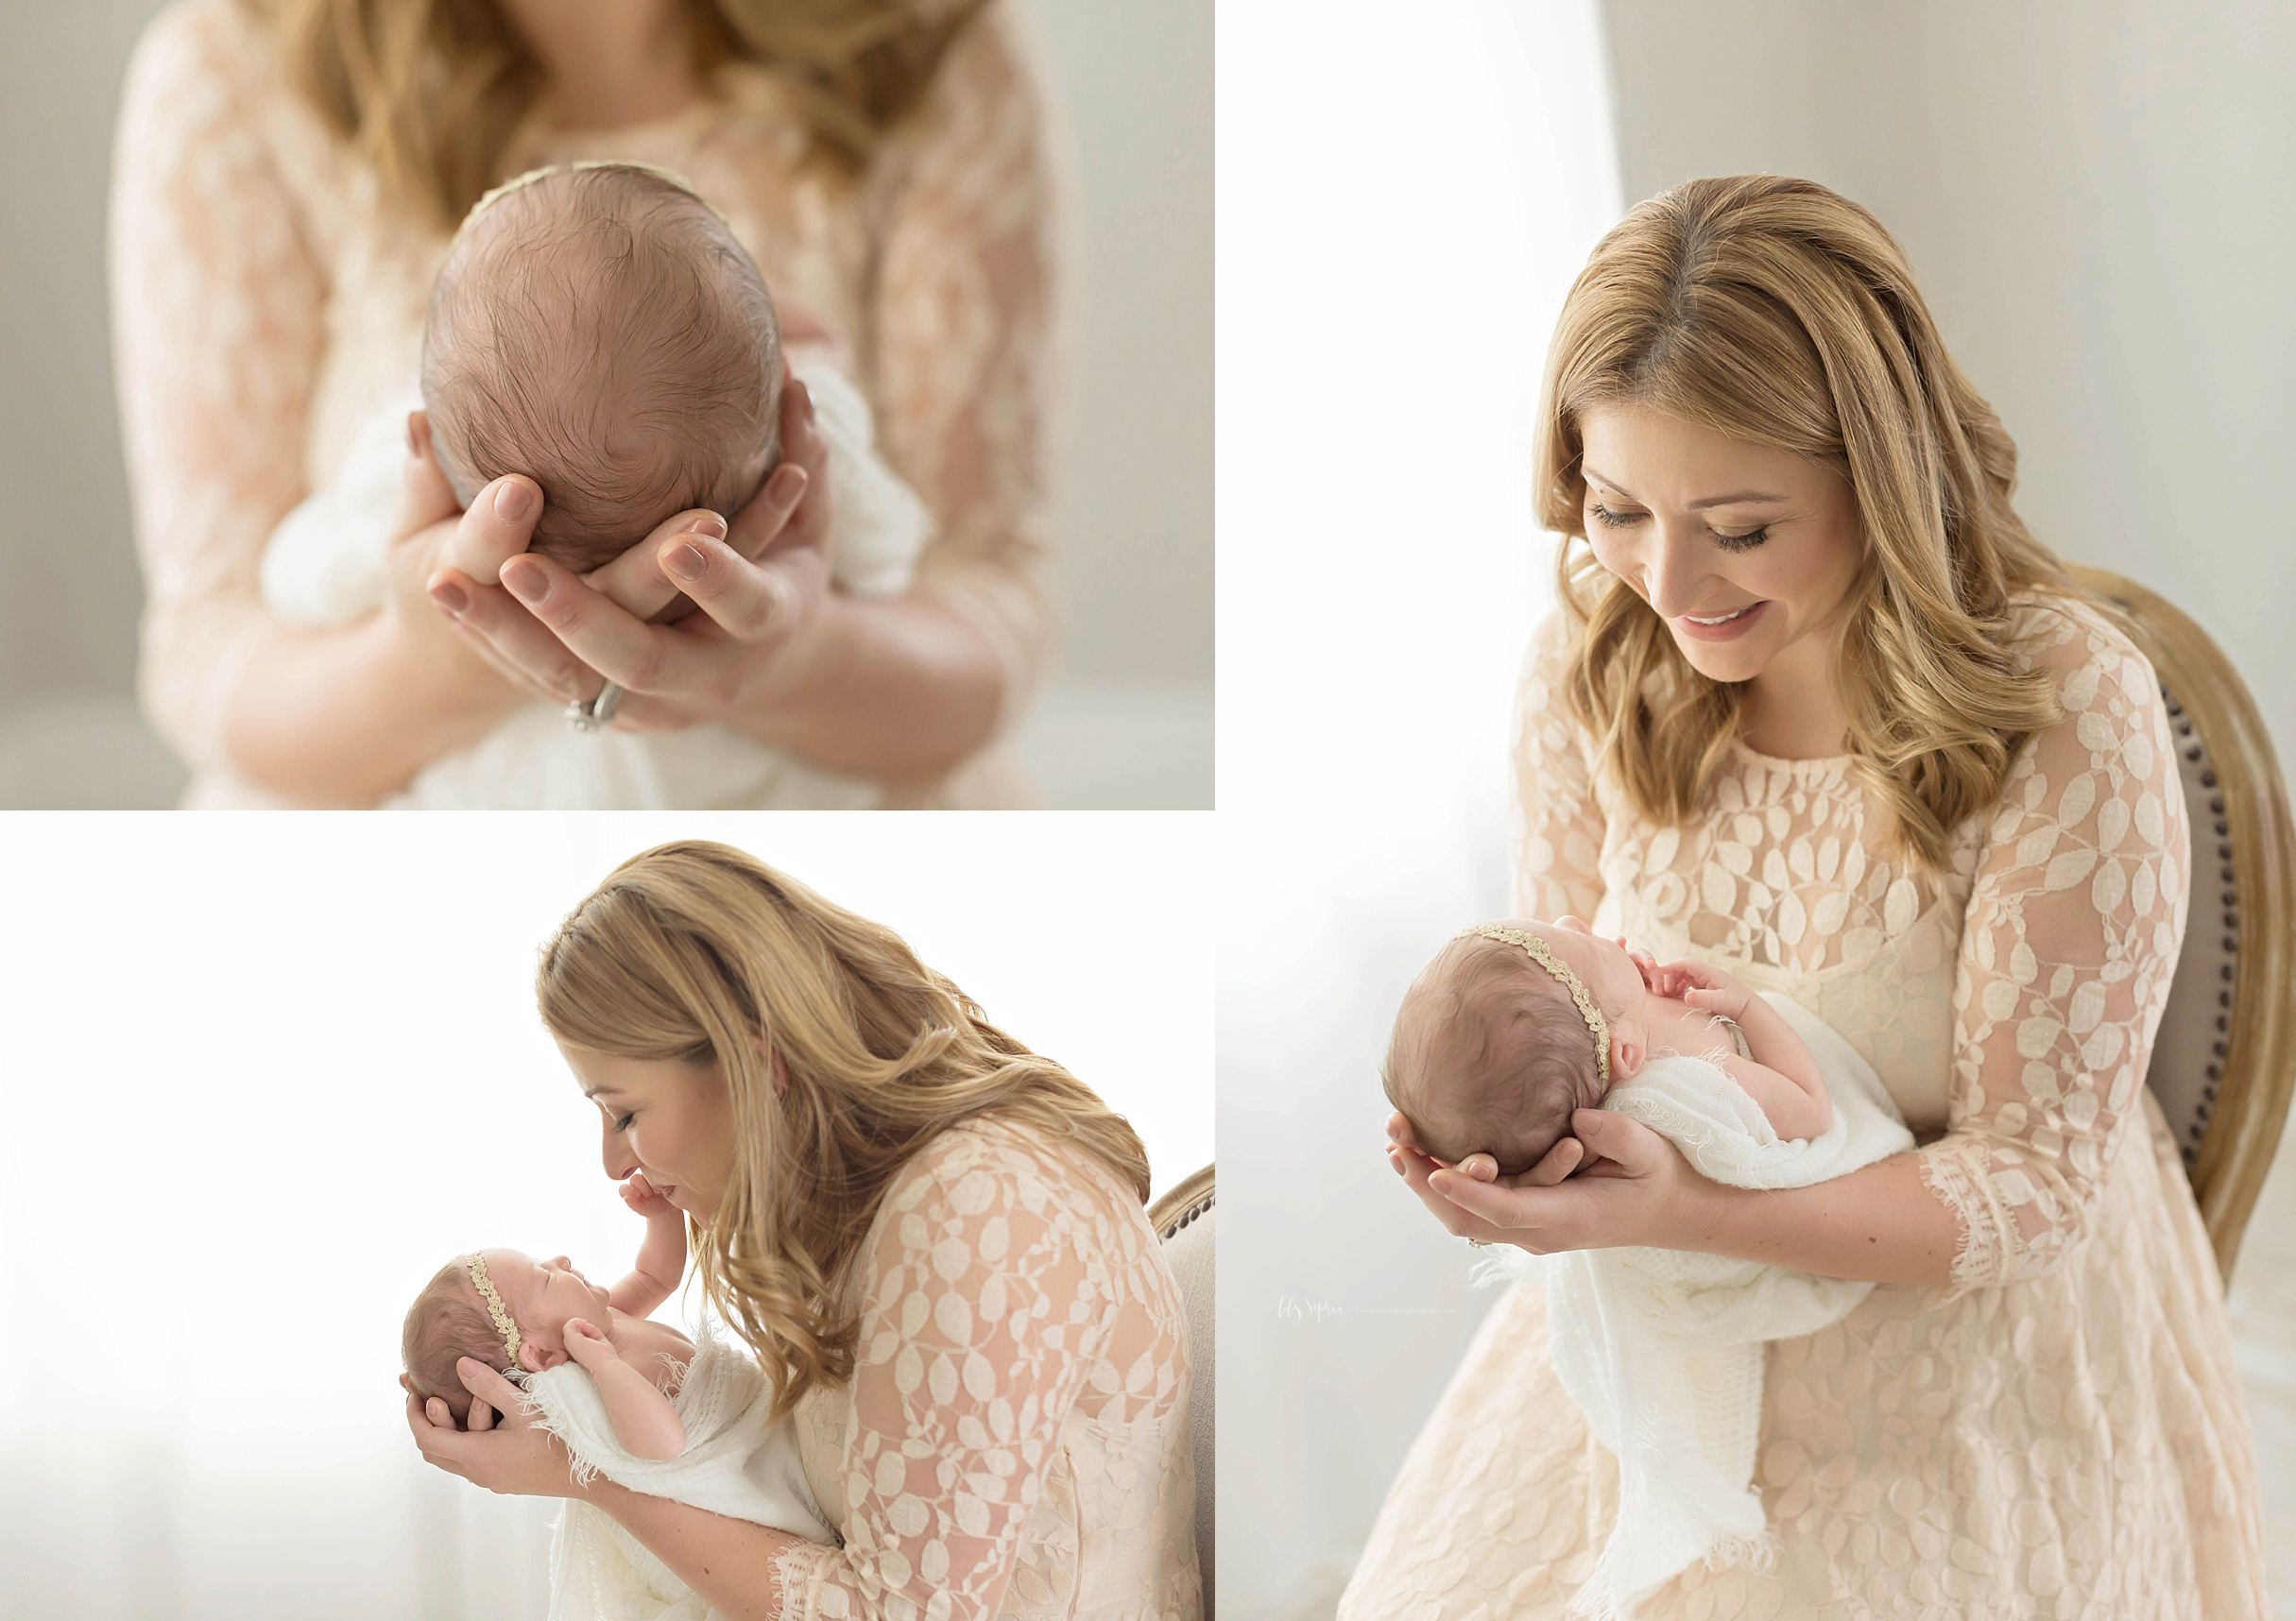  Images of a new mom, in a lace dress, sitting in a chair and holding her newborn, baby, daughter, up in her arms.&nbsp; 